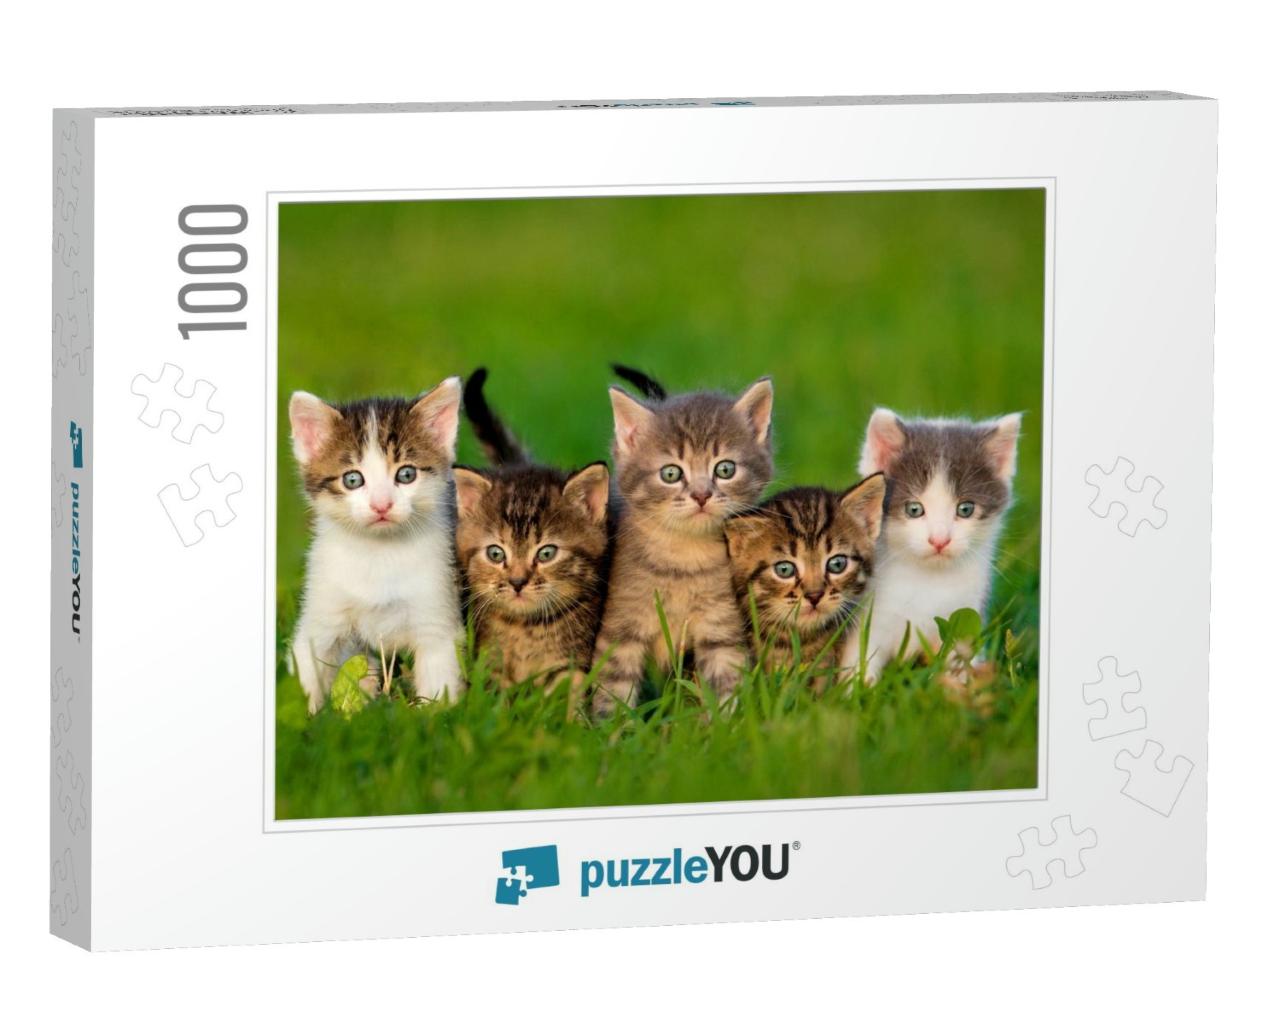 Group of Five Little Kittens Sitting on the Grass... Jigsaw Puzzle with 1000 pieces